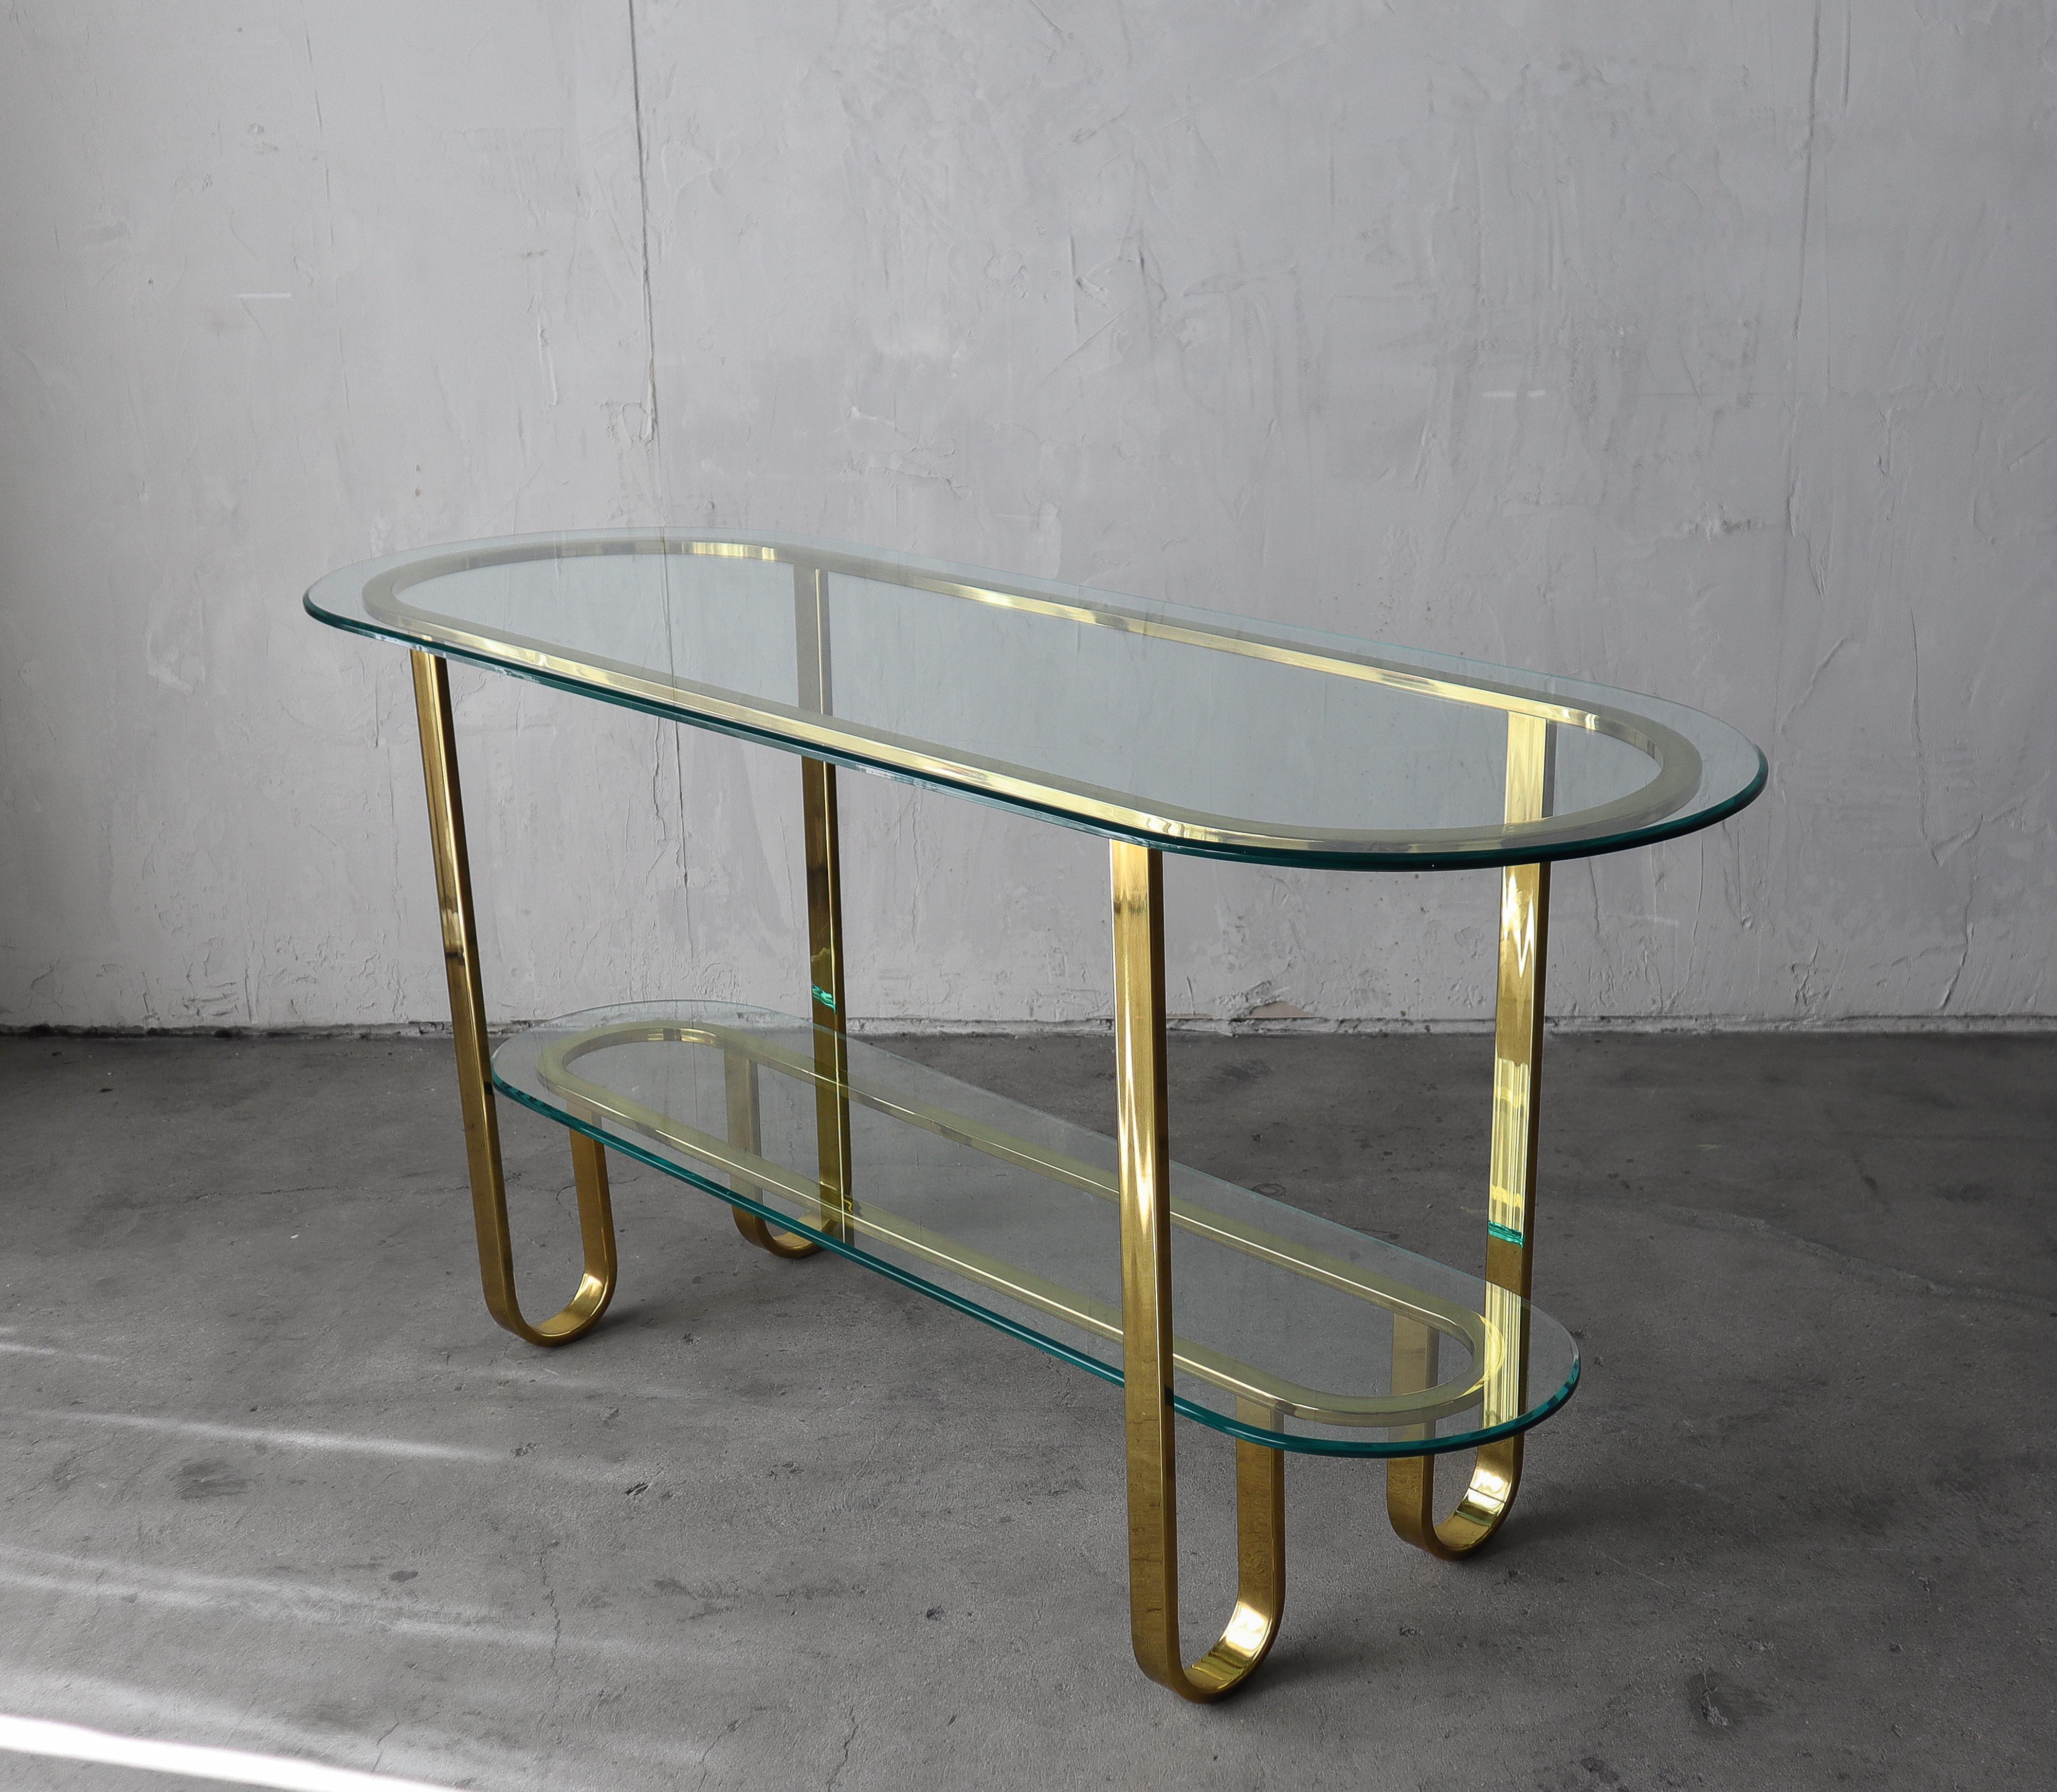 Simplistic yet sophisticated 2-tier brass and glass Mid-Century console table by Milo Baughman. The transparency of this piece makes it perfect in most any space. With two tiers of glass shelving for all your display and storage needs.  It would